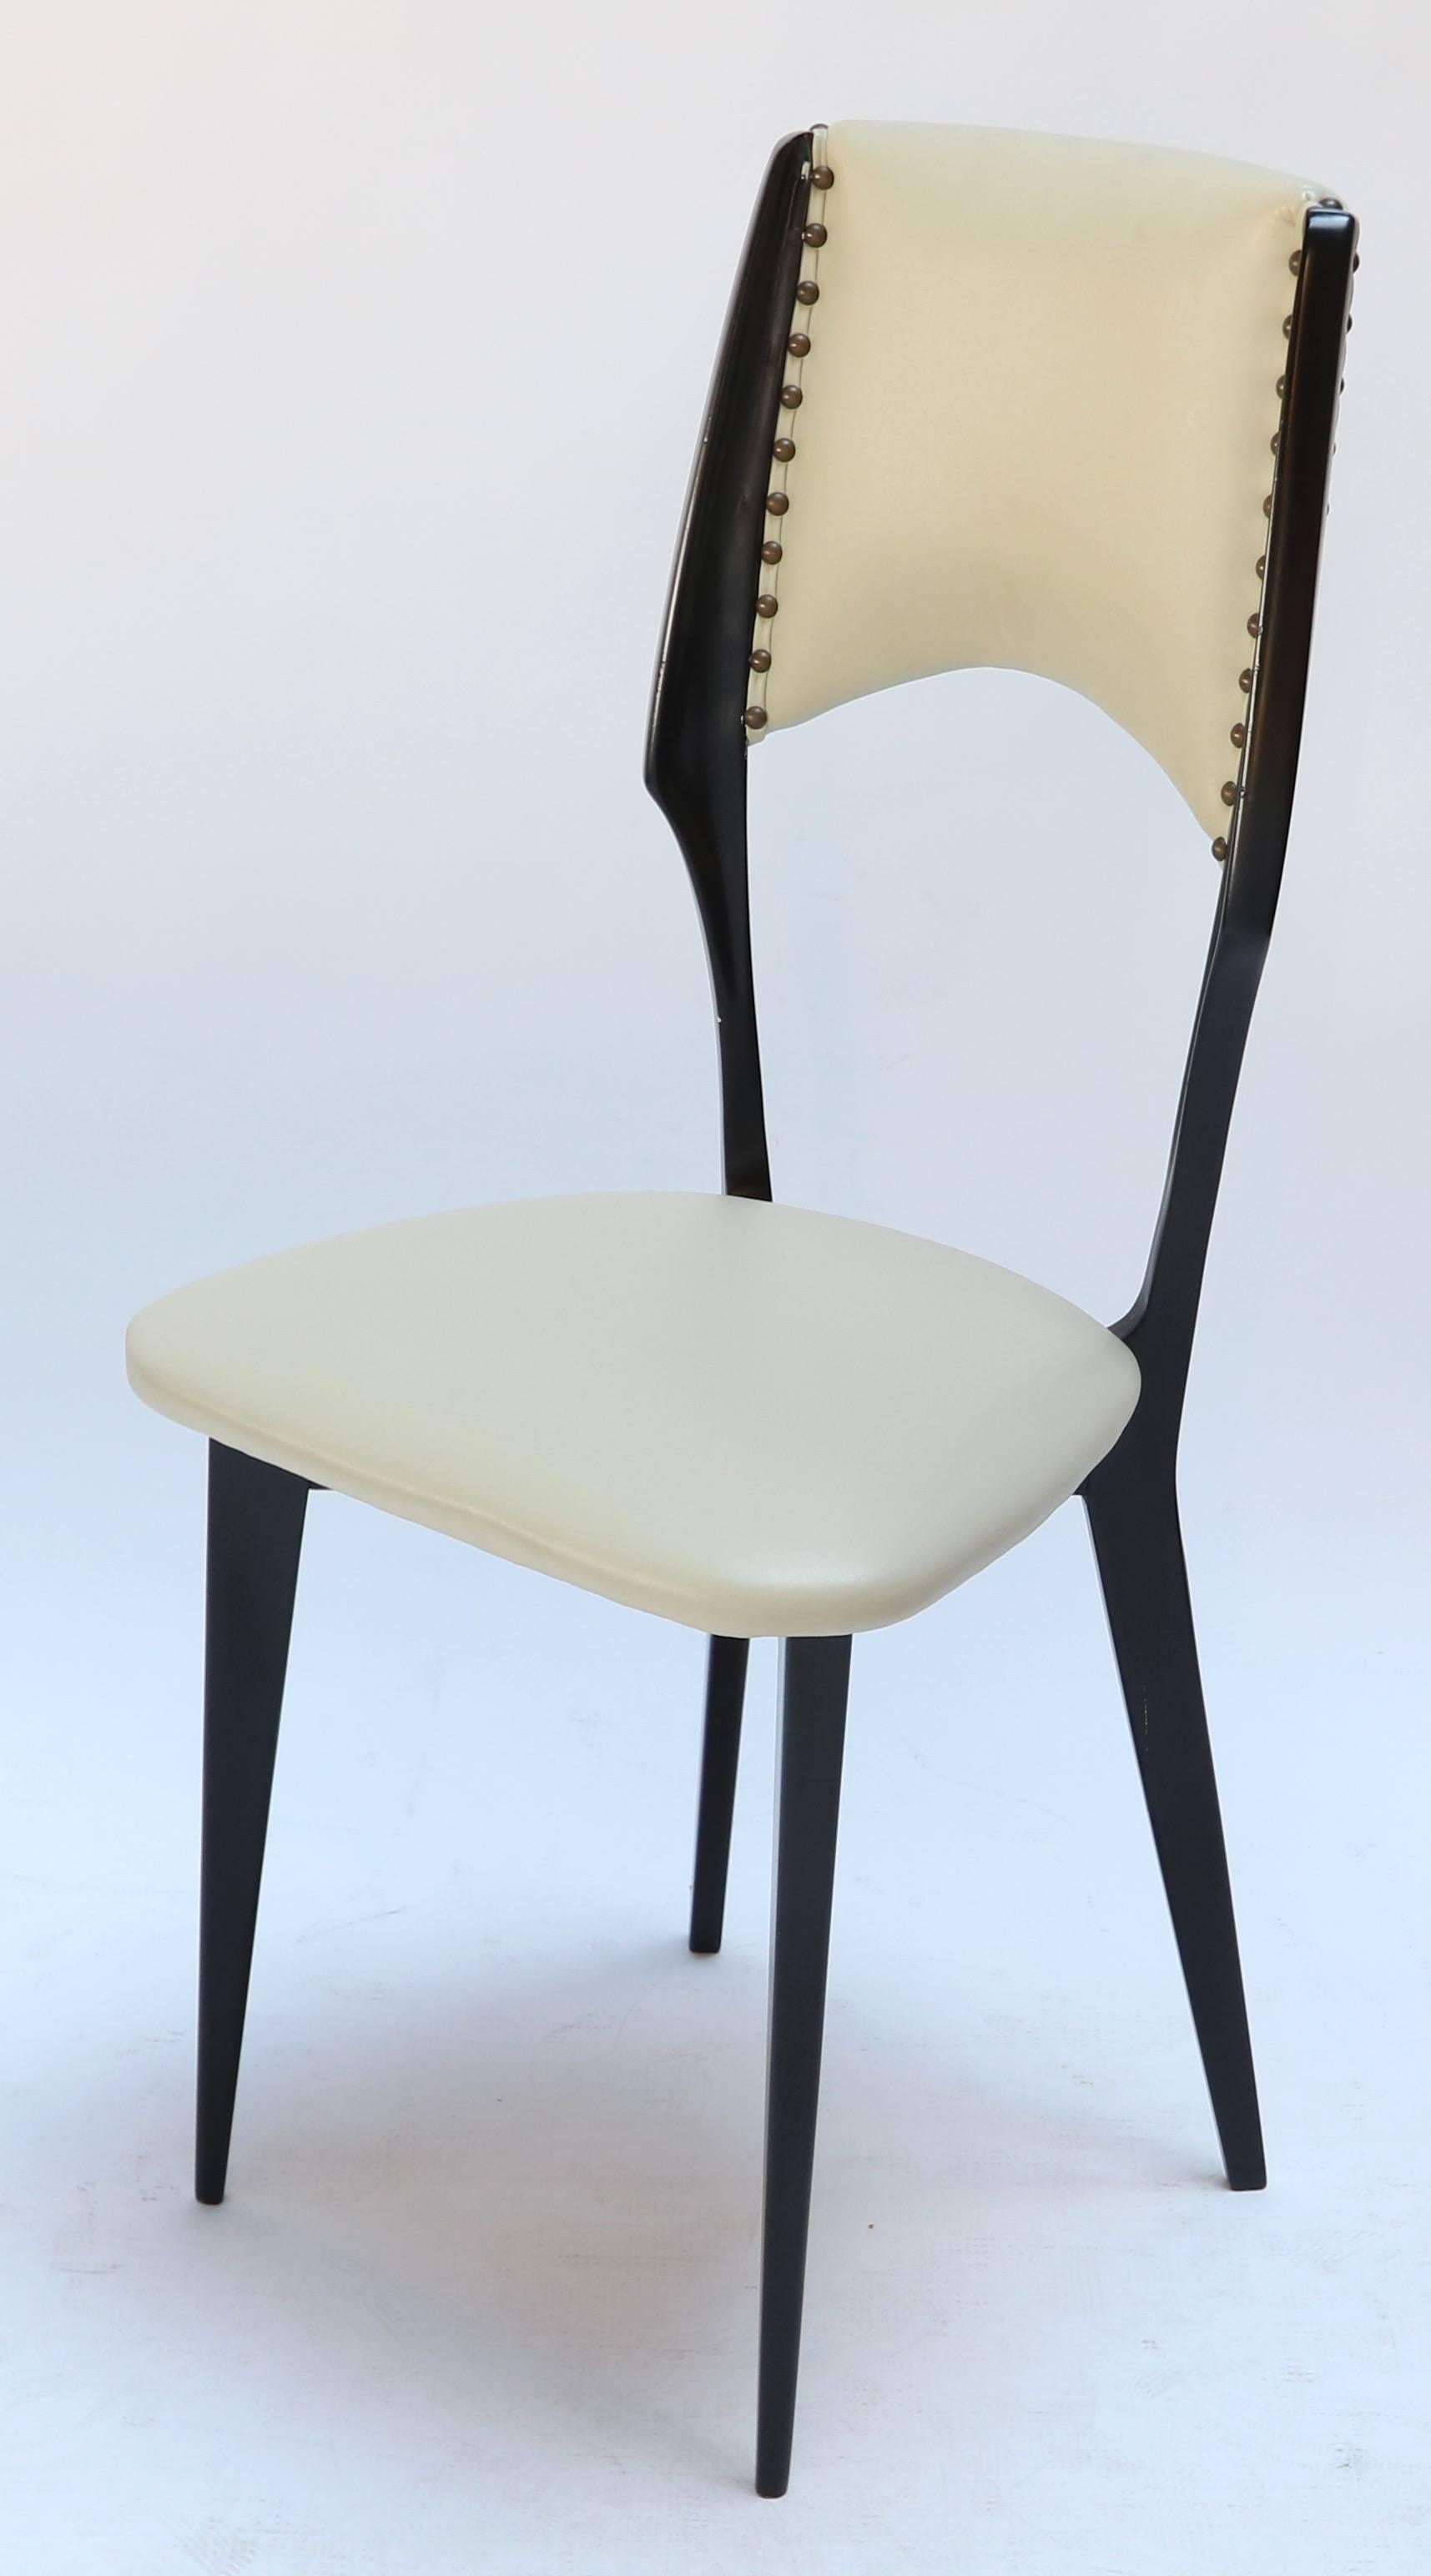 Mid-Century Modern Italian Ico Parisi Style 1960s Ebonized Wood Dining Chairs in Beige Leather For Sale